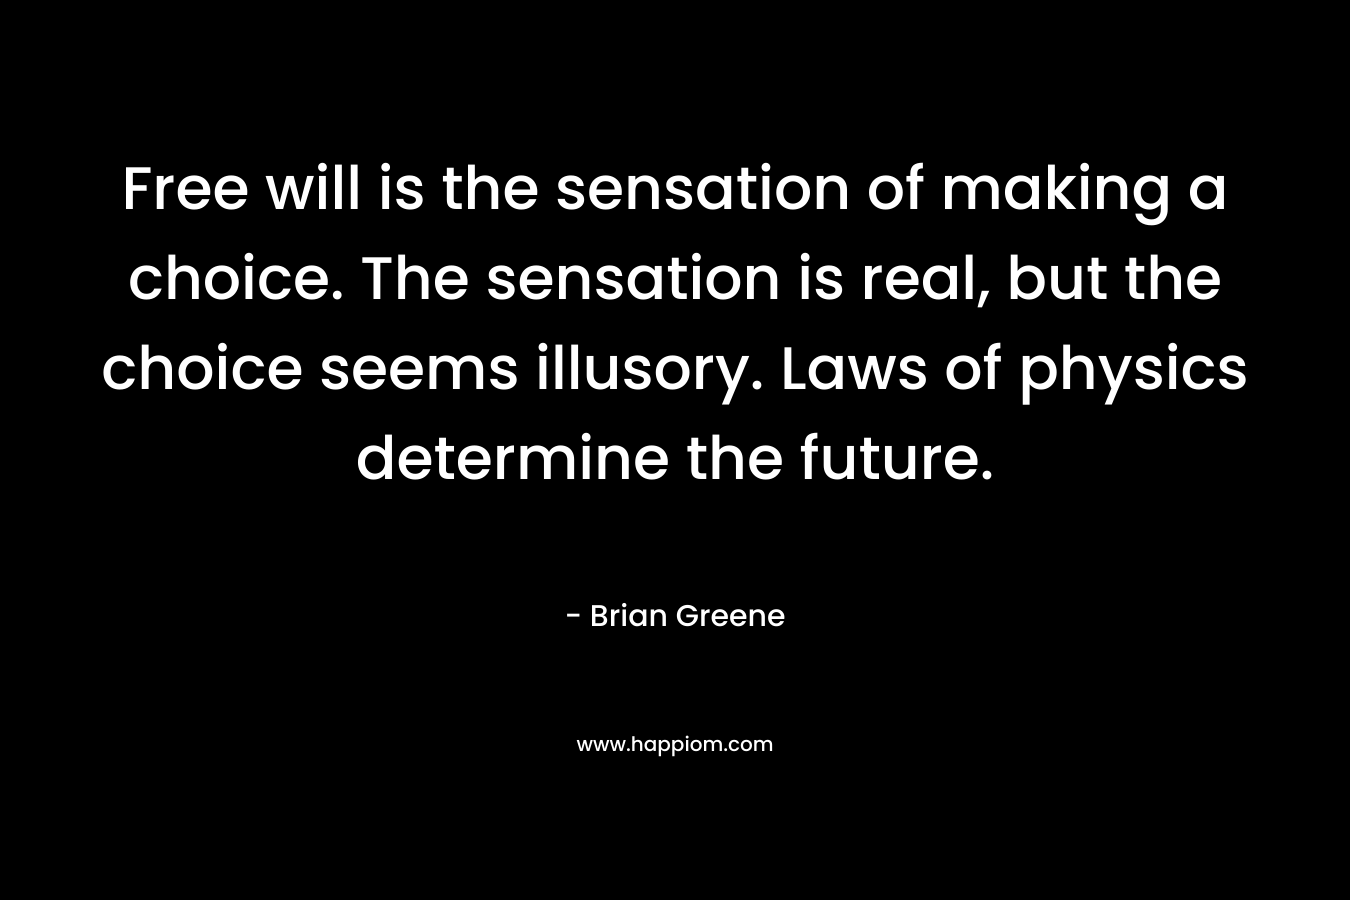 Free will is the sensation of making a choice. The sensation is real, but the choice seems illusory. Laws of physics determine the future.